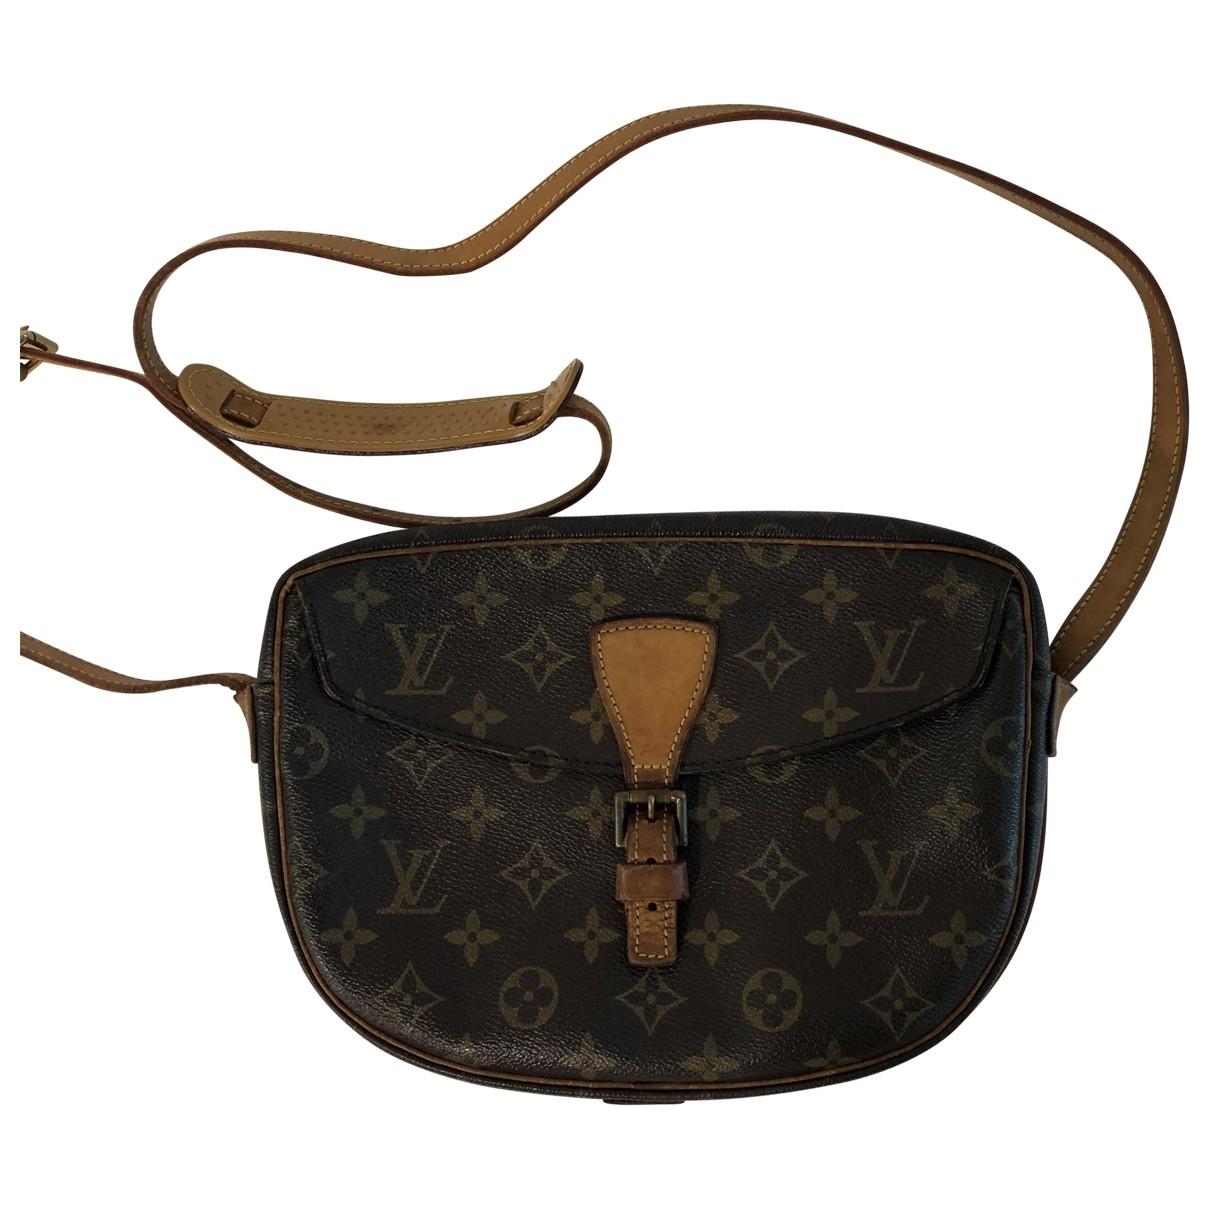 Is Louis Vuitton Sold At Nordstrom Rack Avengers